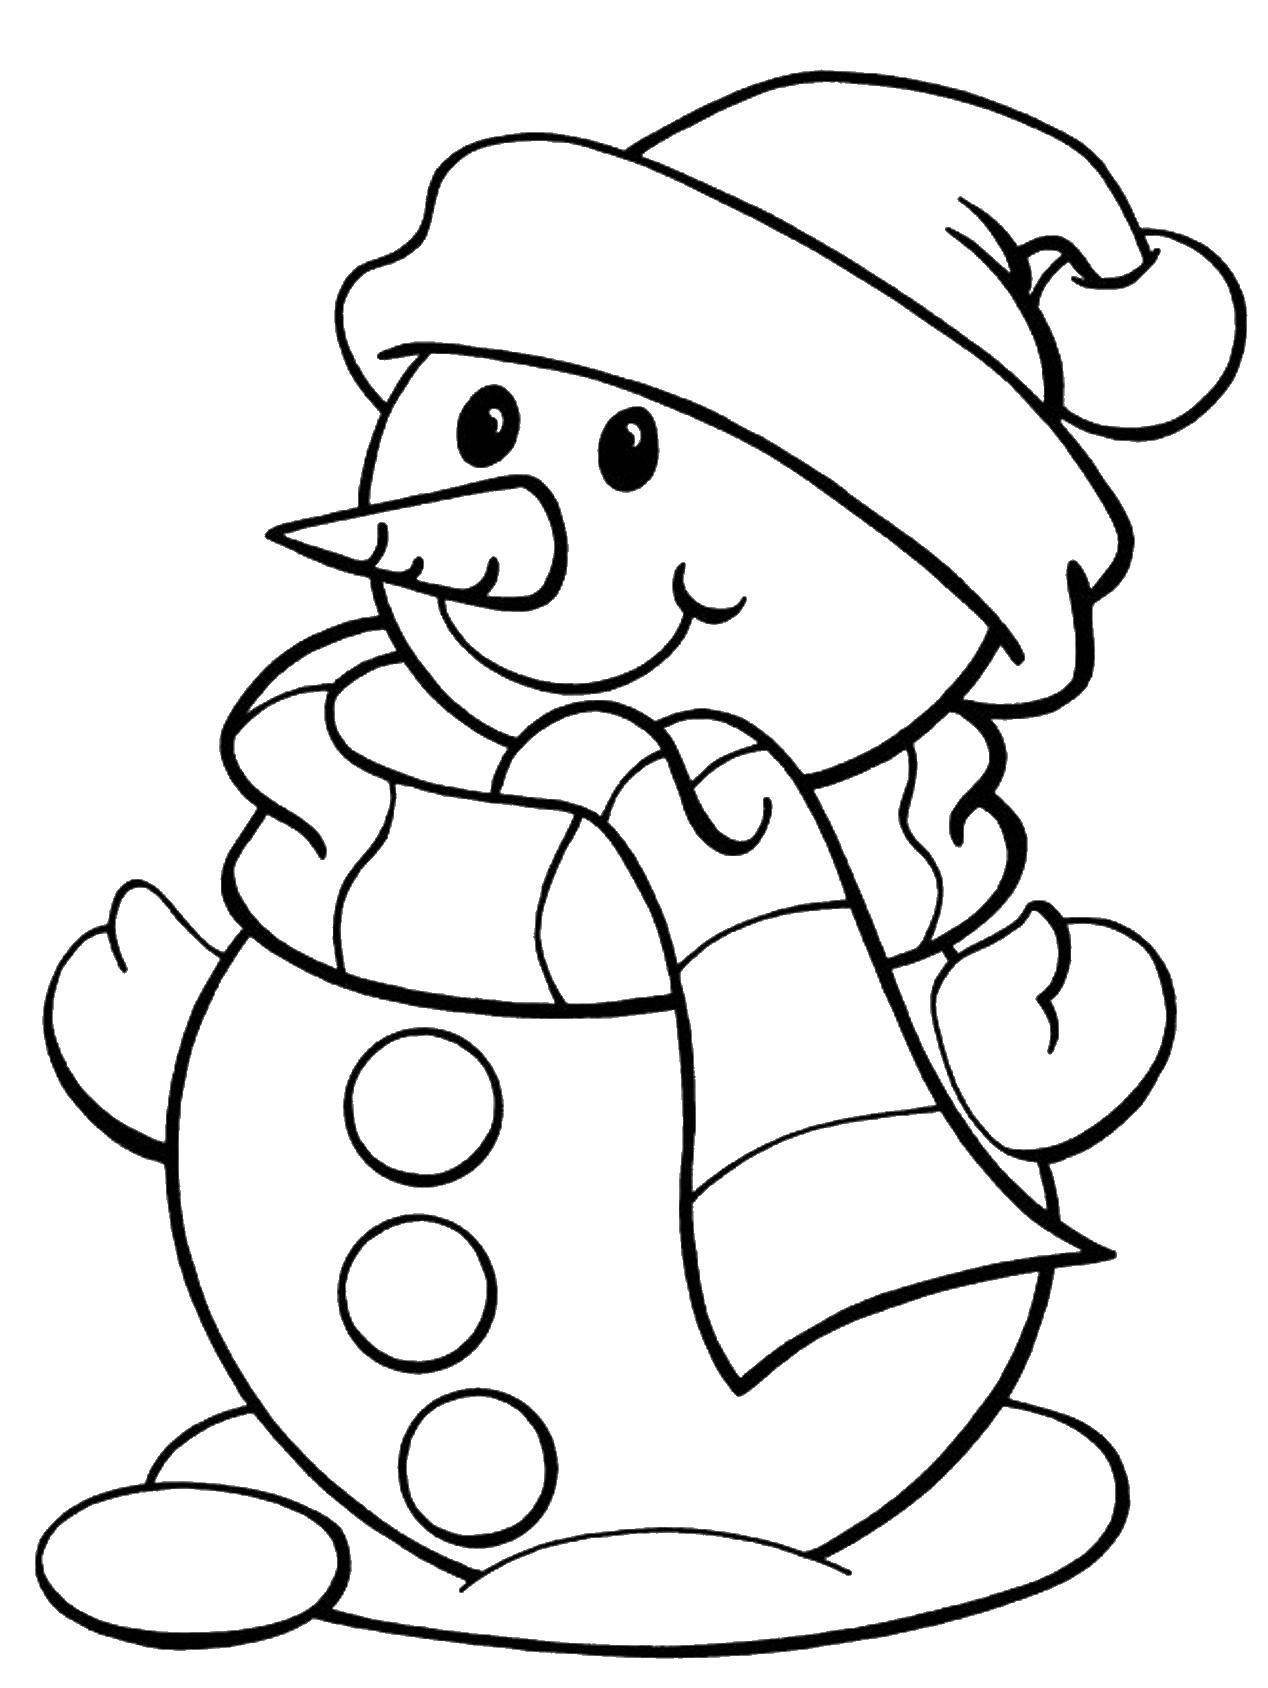 Coloring Snowman. Category coloring winter. Tags:  winter, snow, snowmen.